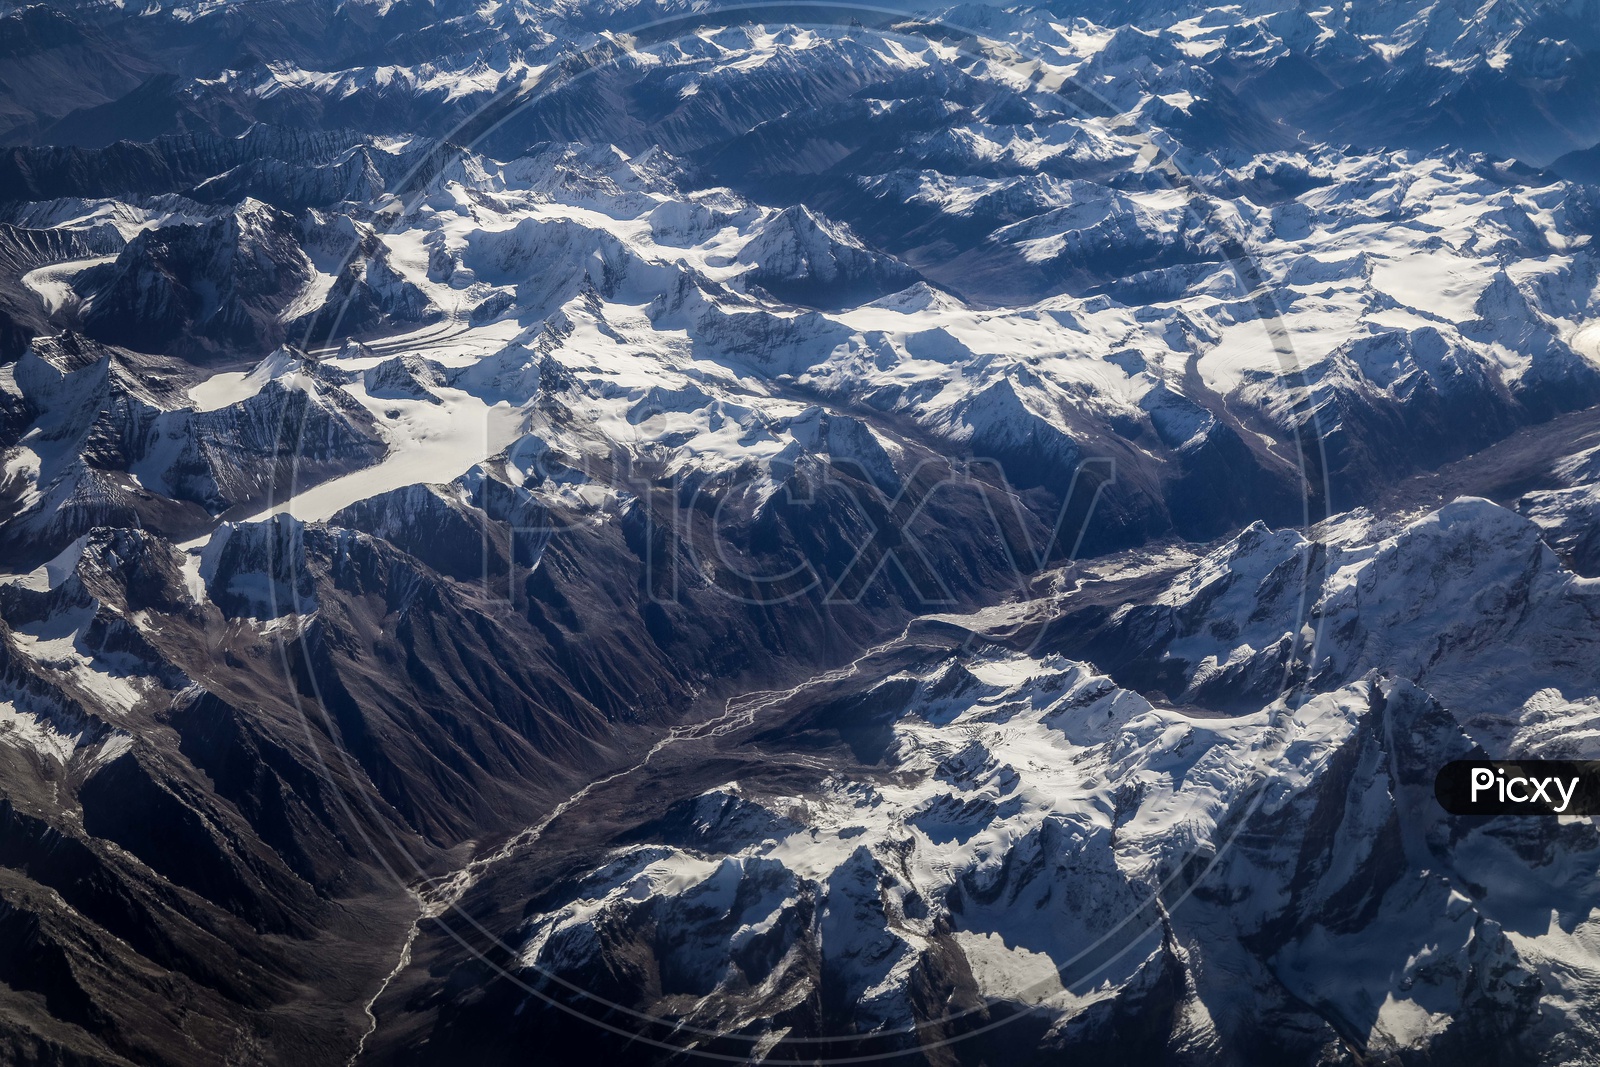 Snow-capped mountains of leh captured from flight window